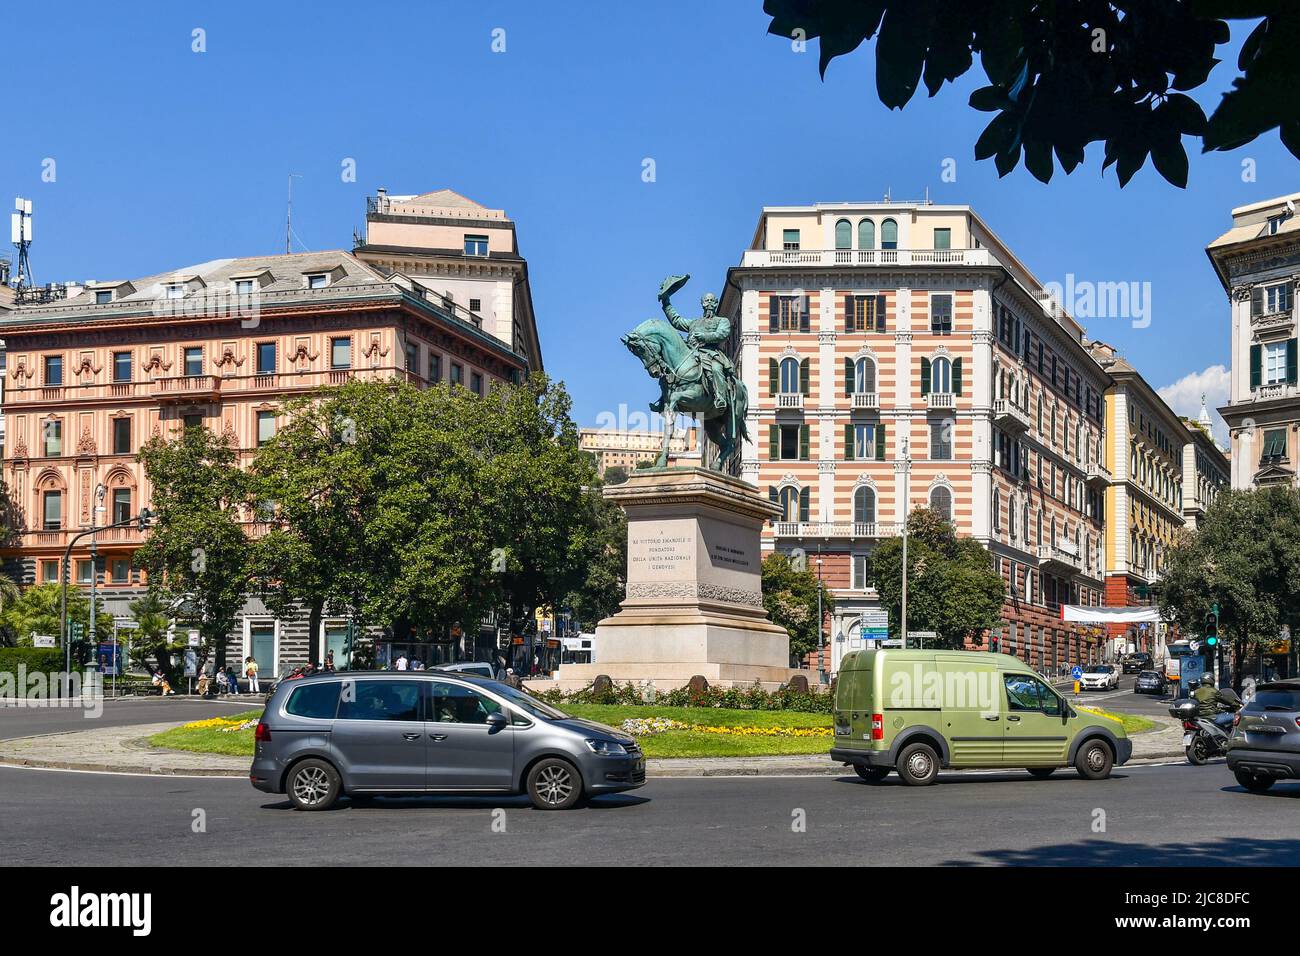 View of Piazza Corvetto square with the bronze statue of Victor Emmanuel of Savoy in the centre of the roundabout, Genoa, Liguria, Italy Stock Photo